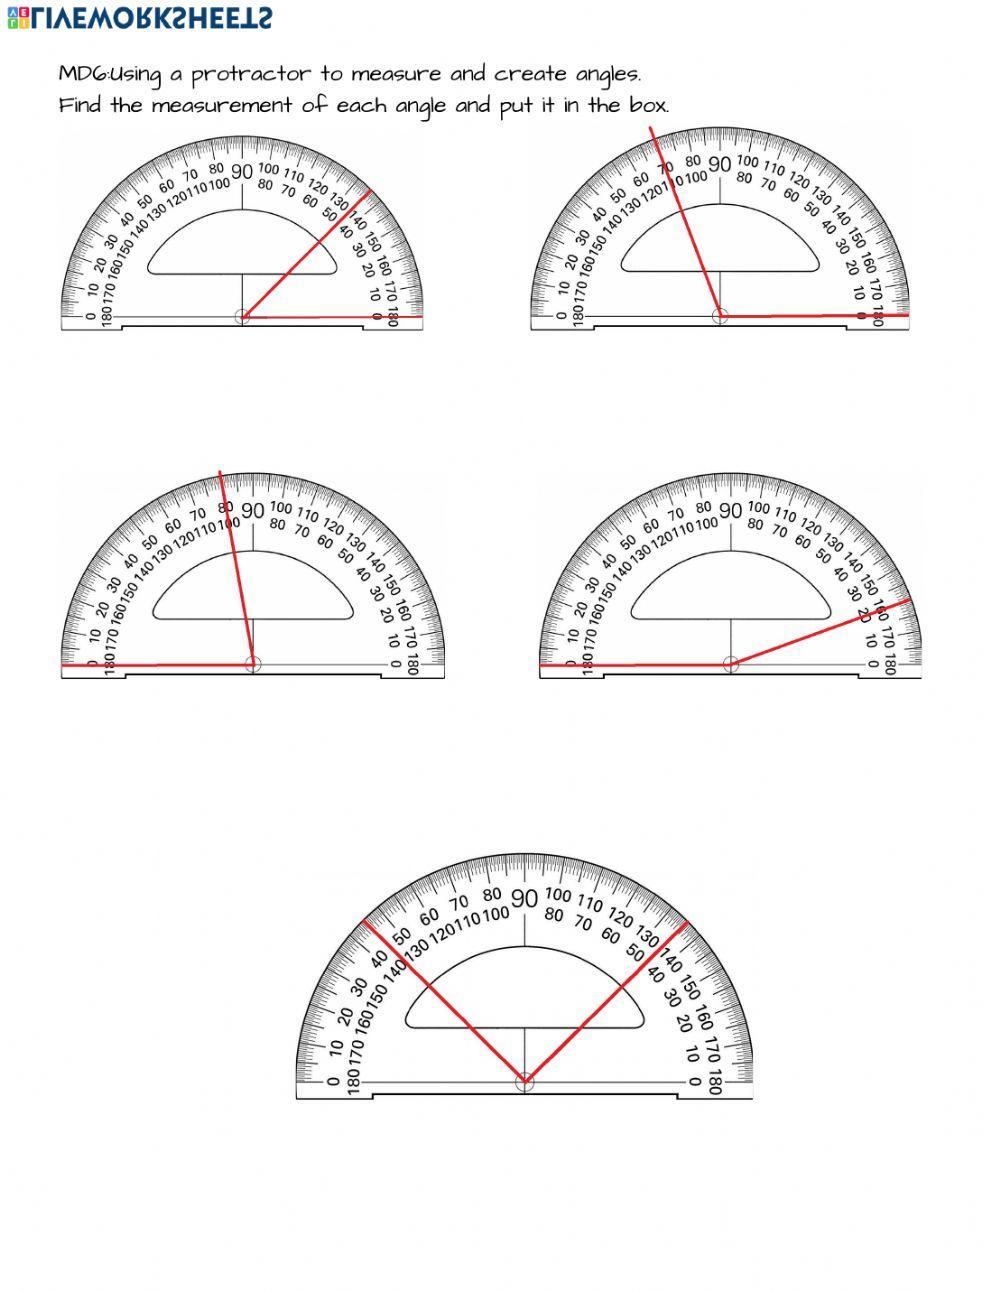 4.MD.6 Measuring angles with a protractor